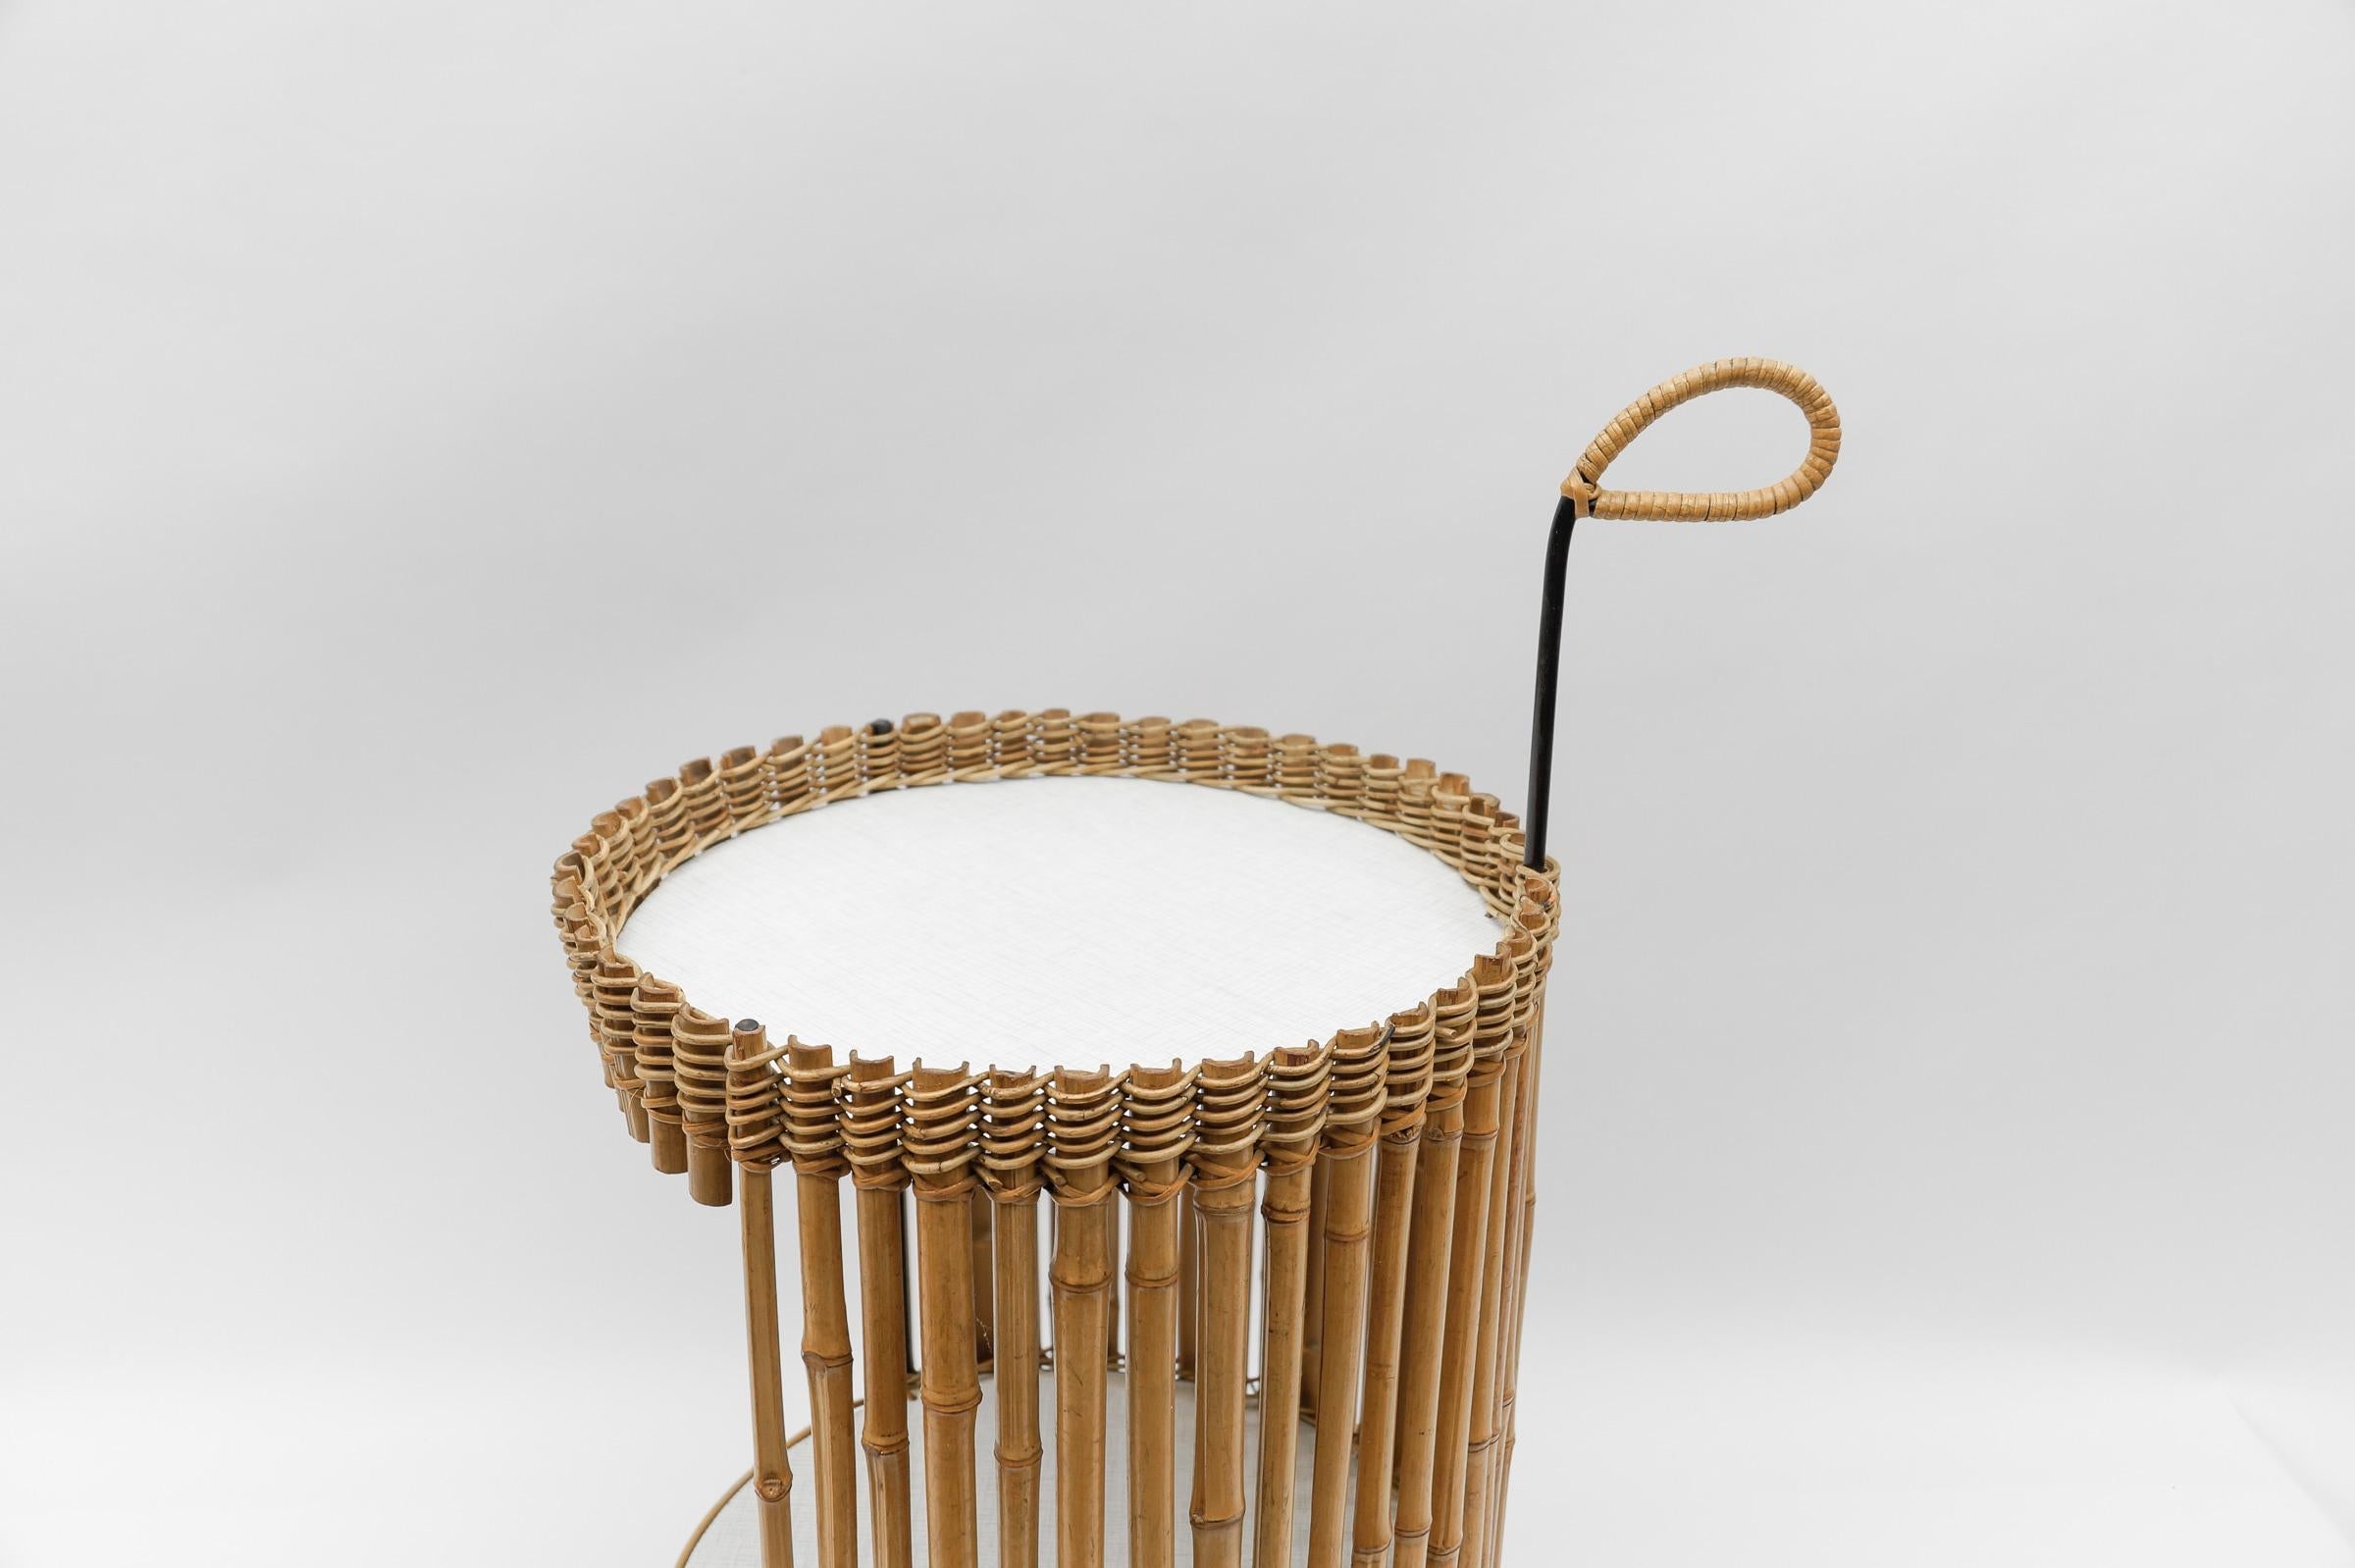 Stunning Mid-Century Modern Round Serving Cart in Bamboo and Metal, 1950s For Sale 2